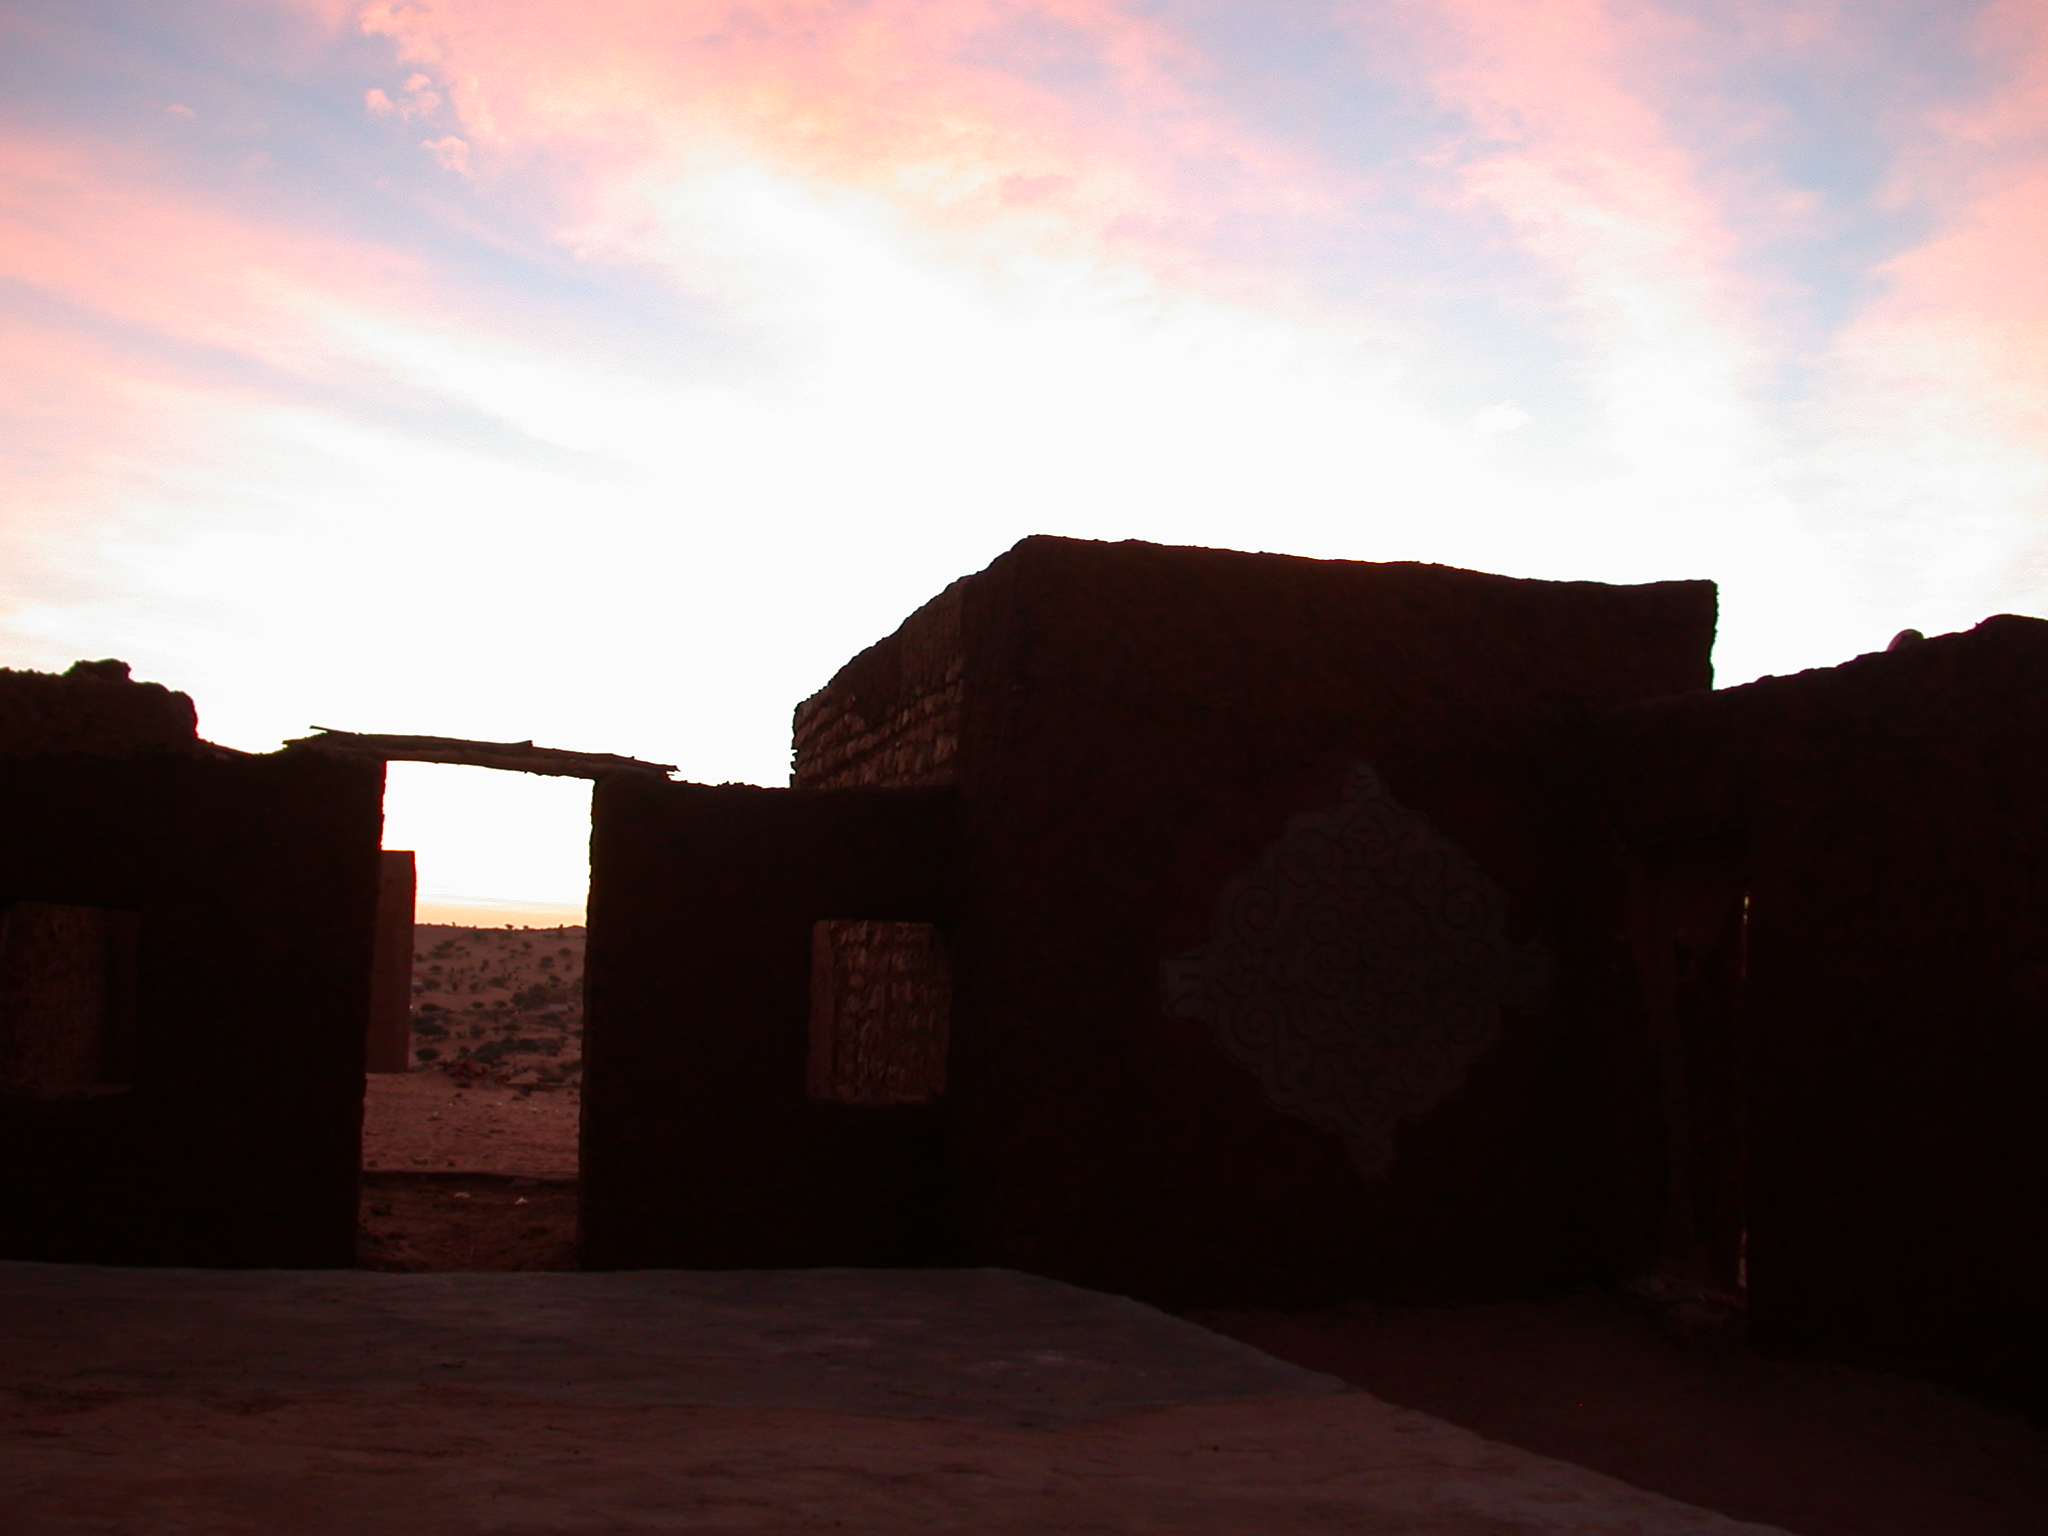 Sunrise at Hotel in Ancient City of Oulata, Mauritania